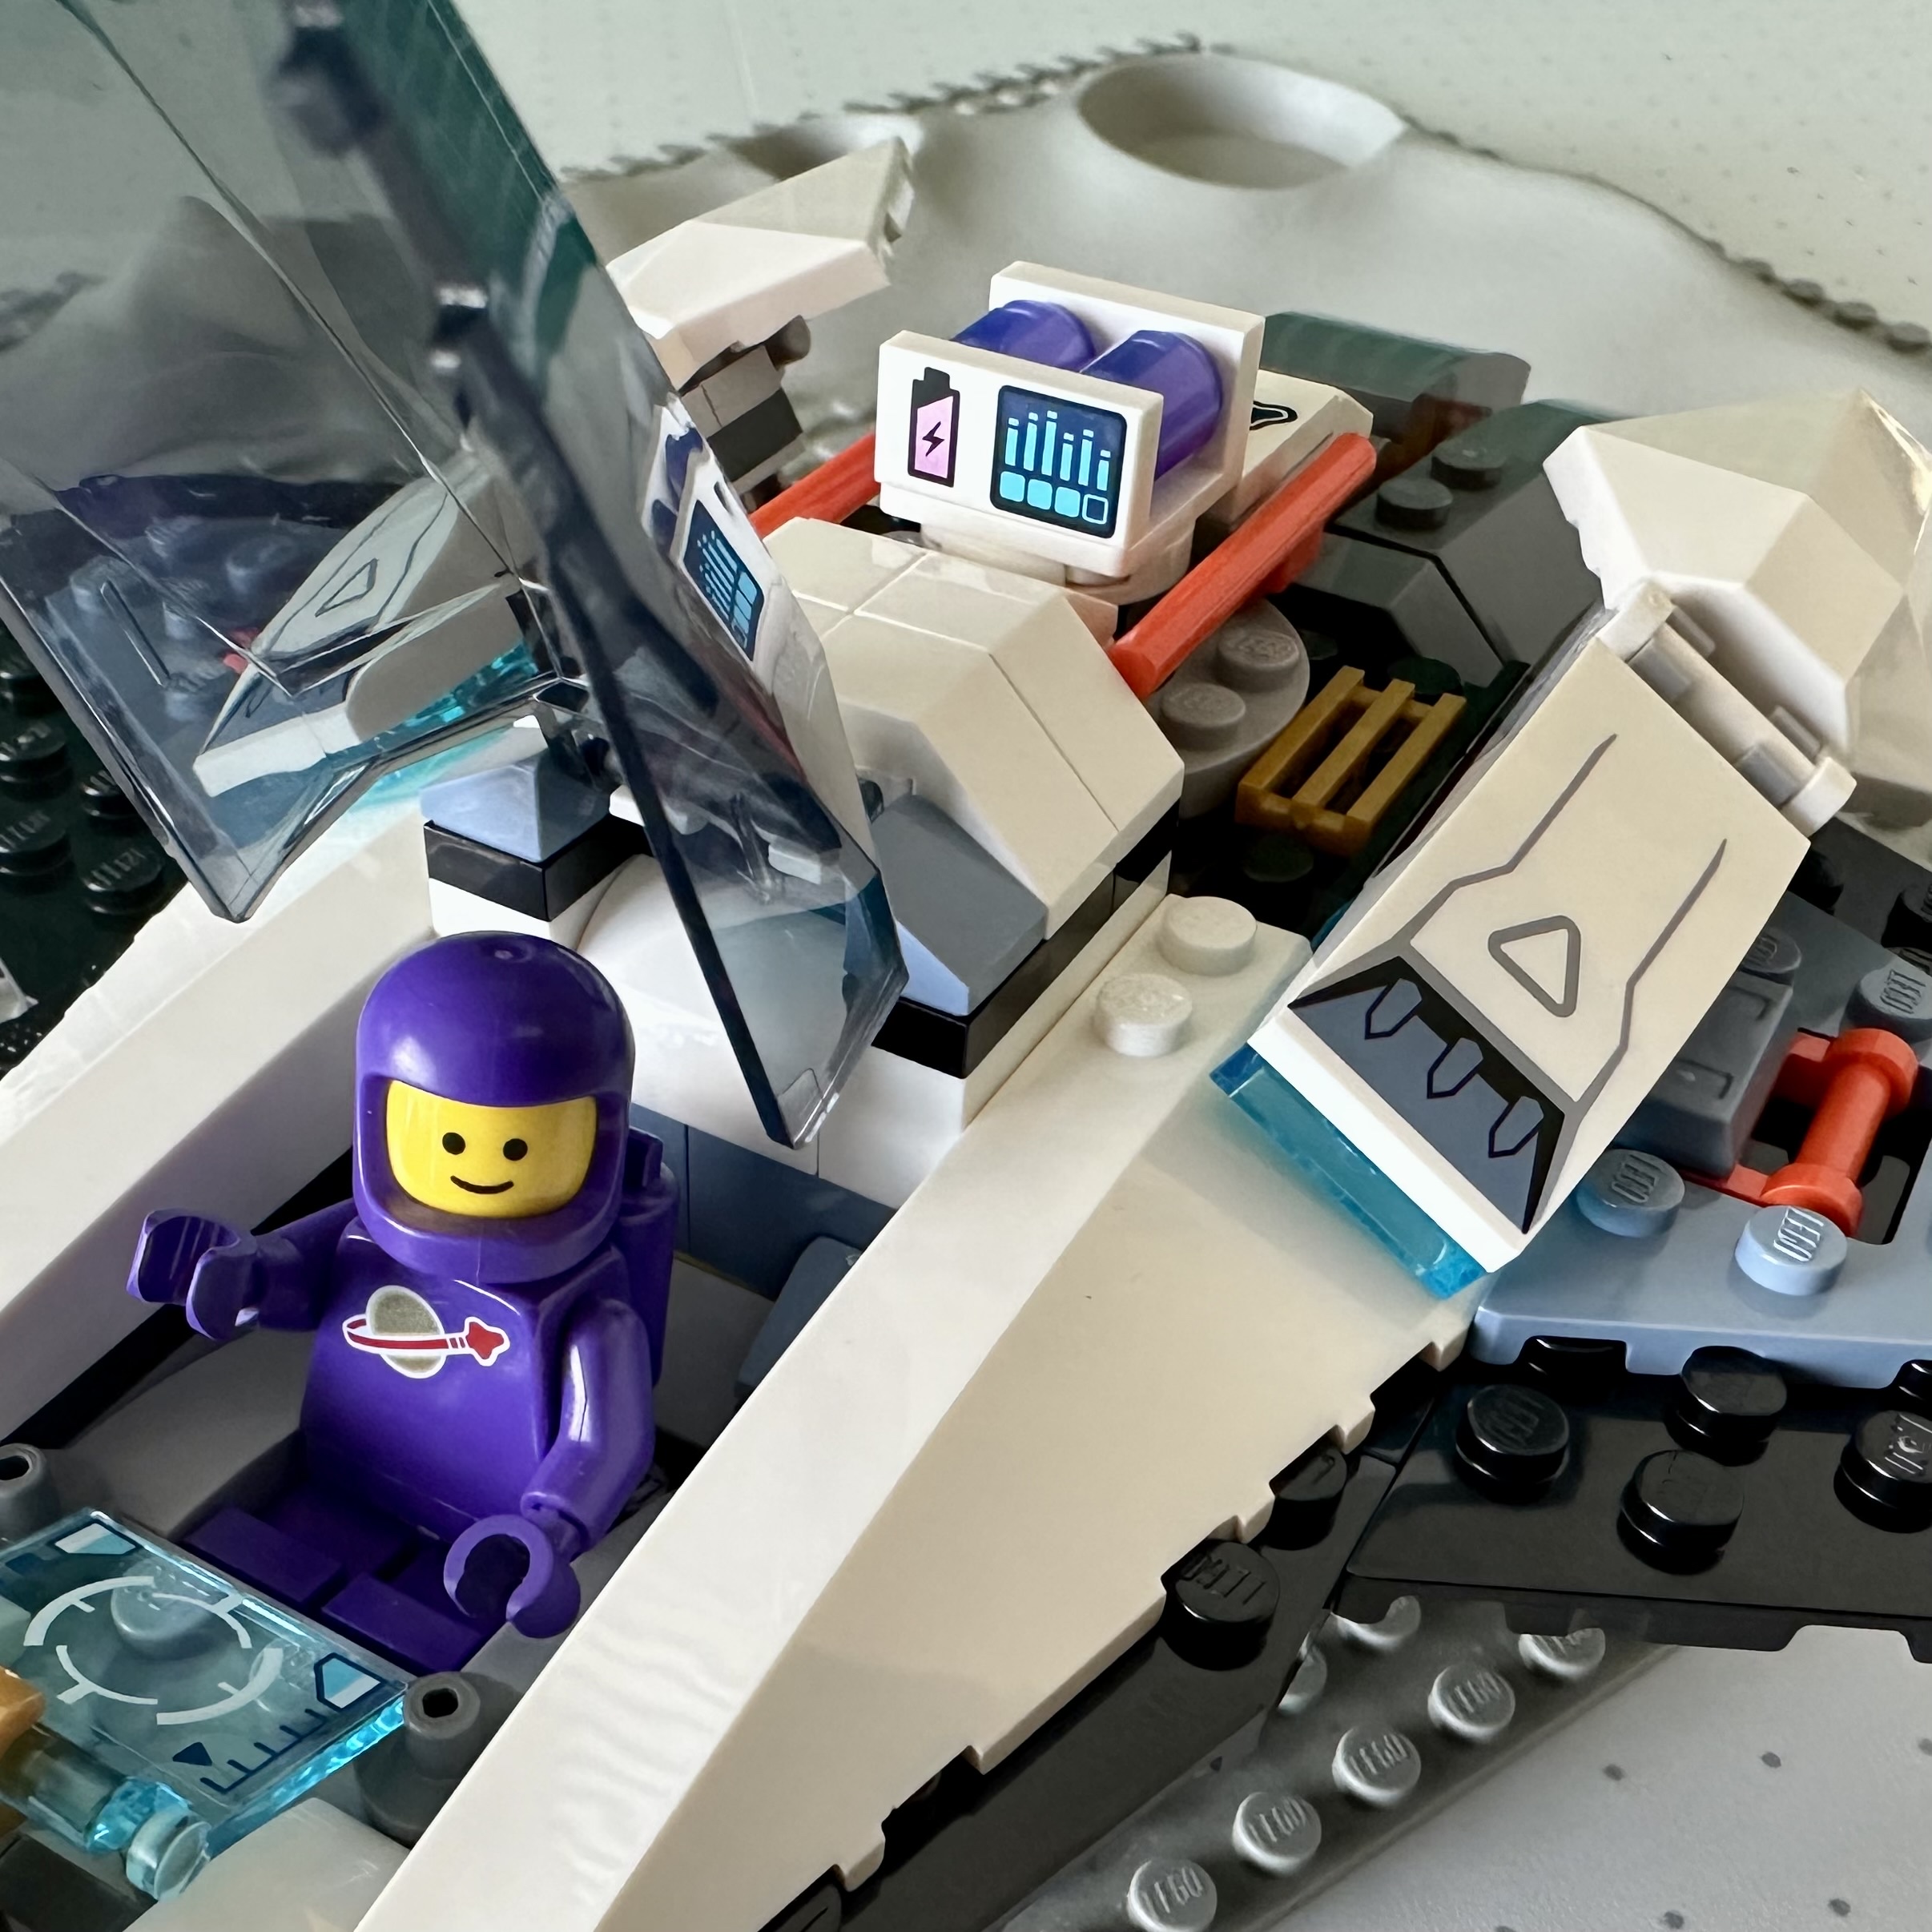 Spaceship from the 2024 Interstellar Spaceship LEGO set piloted by a purple Classic Space astronaut. Posed on a classic gray crater baseplate from the 1970's.